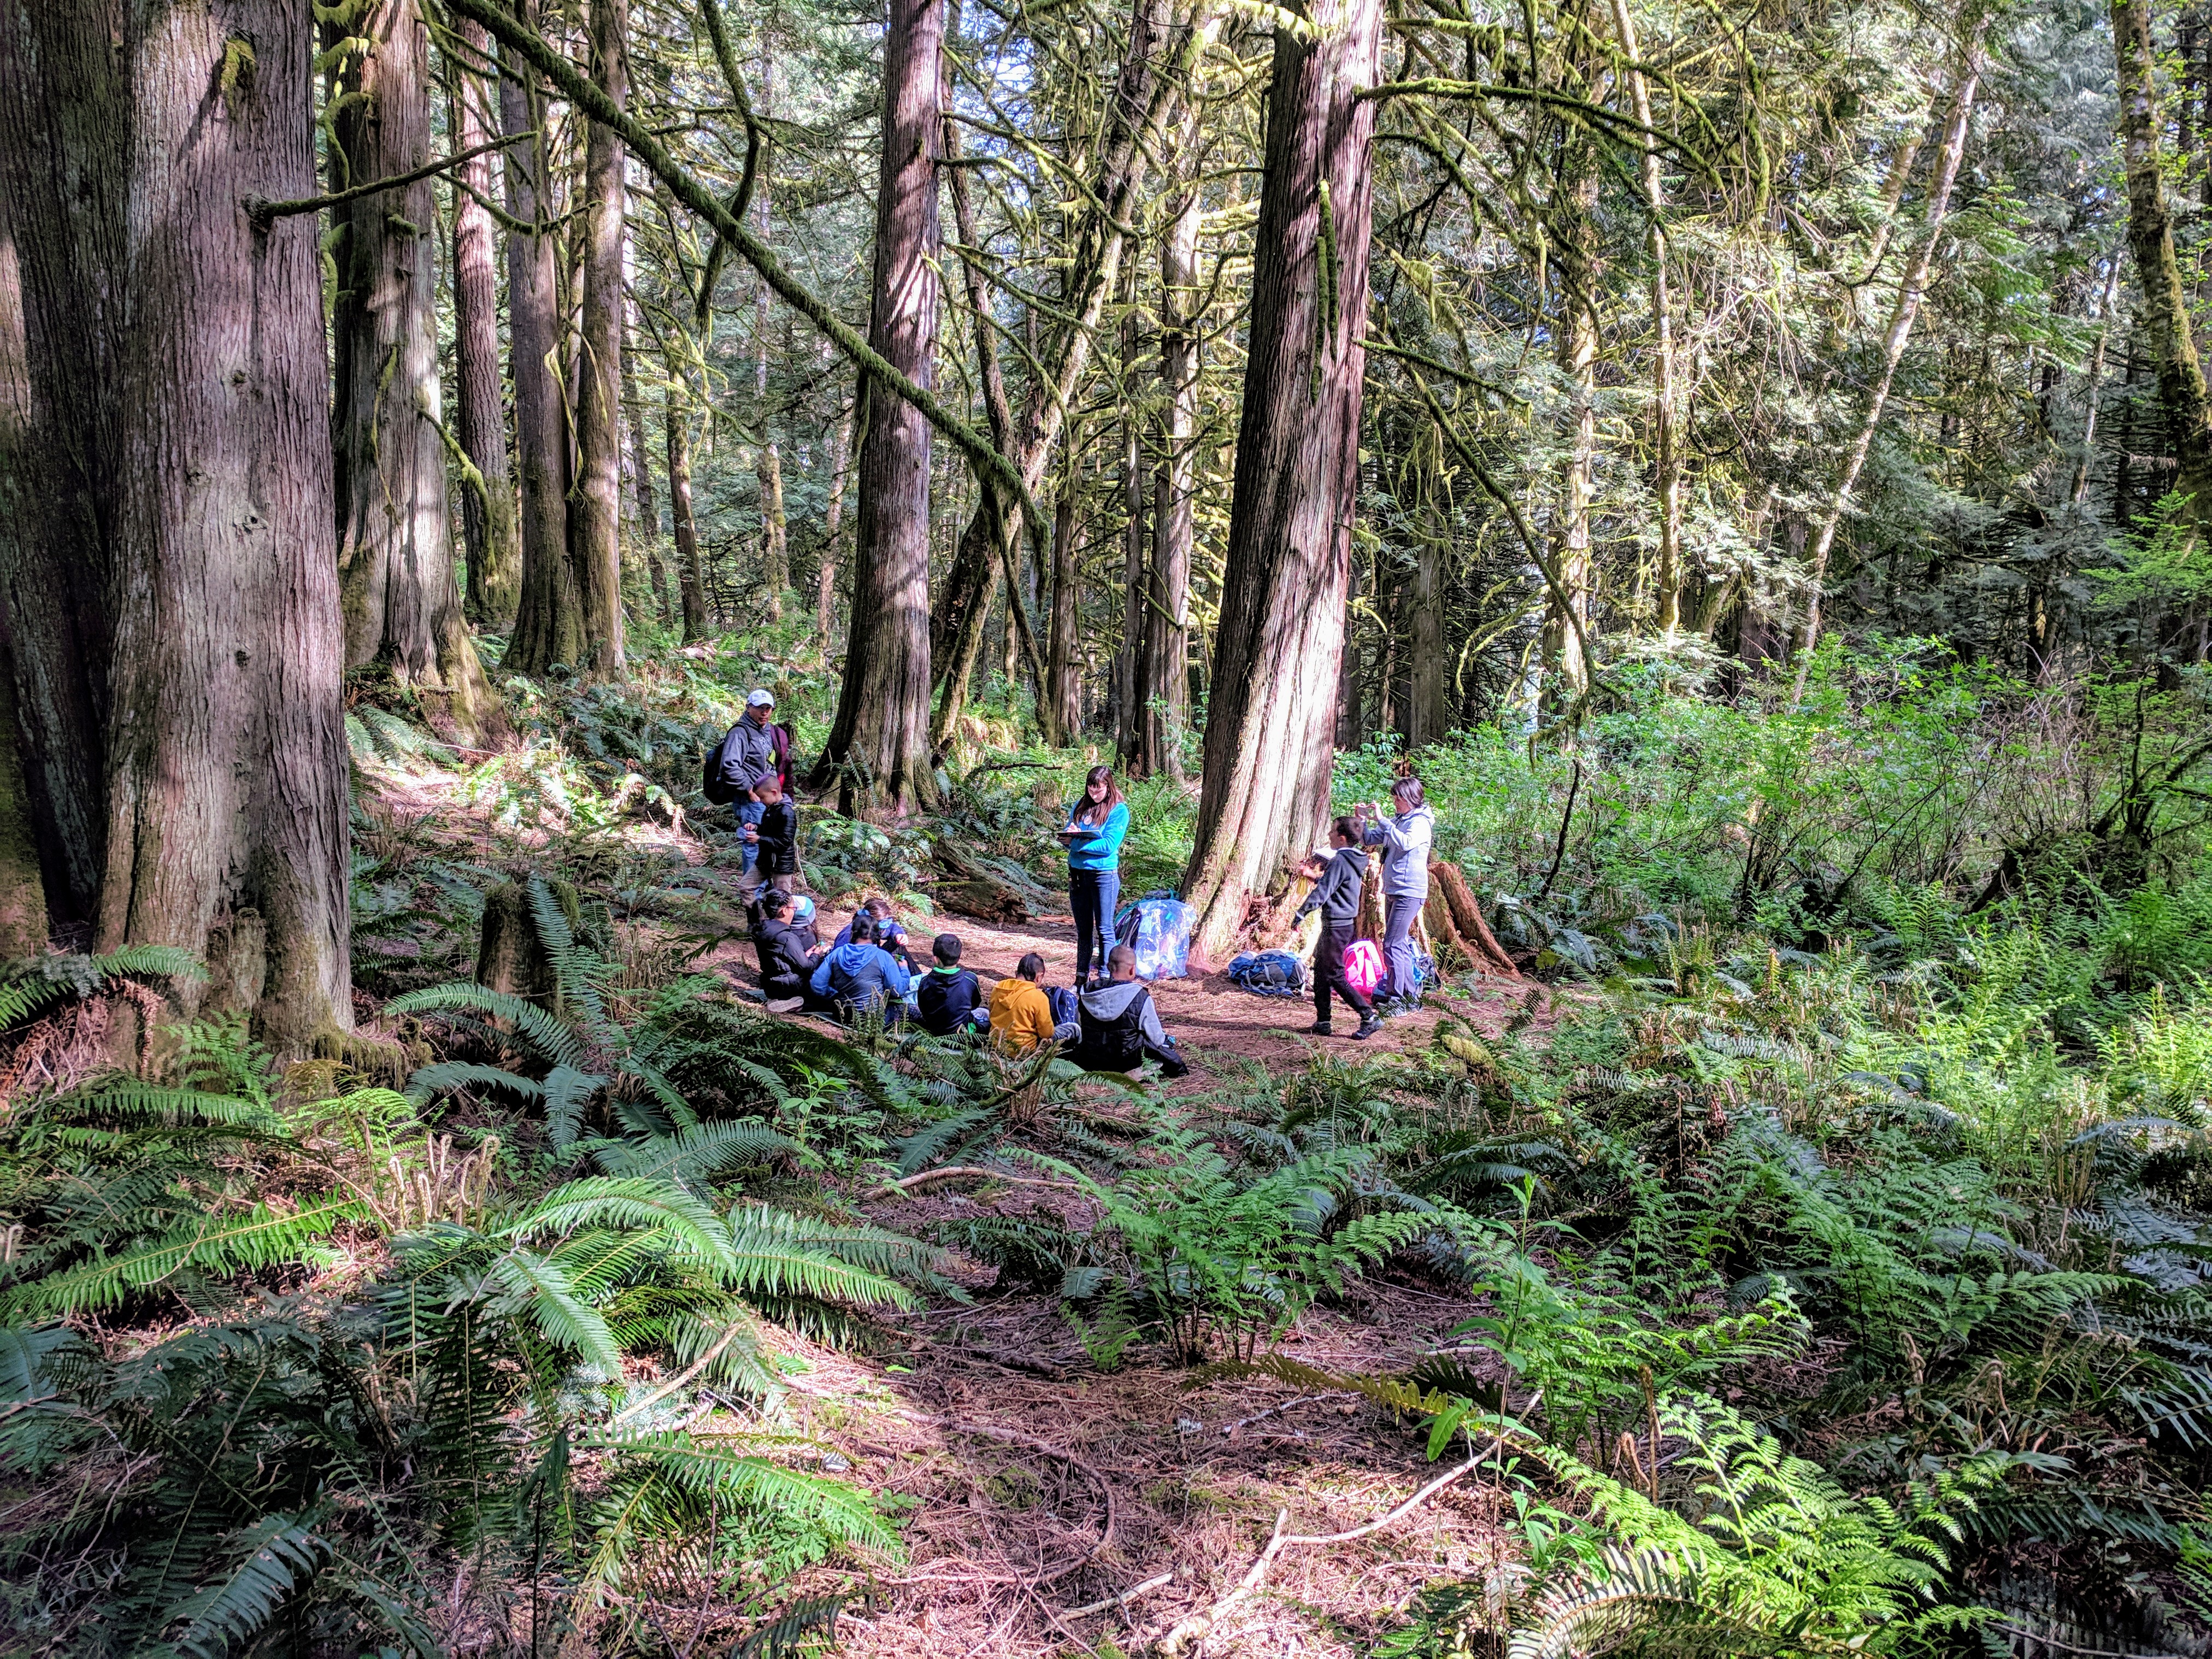 WWU students and third grade students sitting on the forest floor surrounded by sword ferns